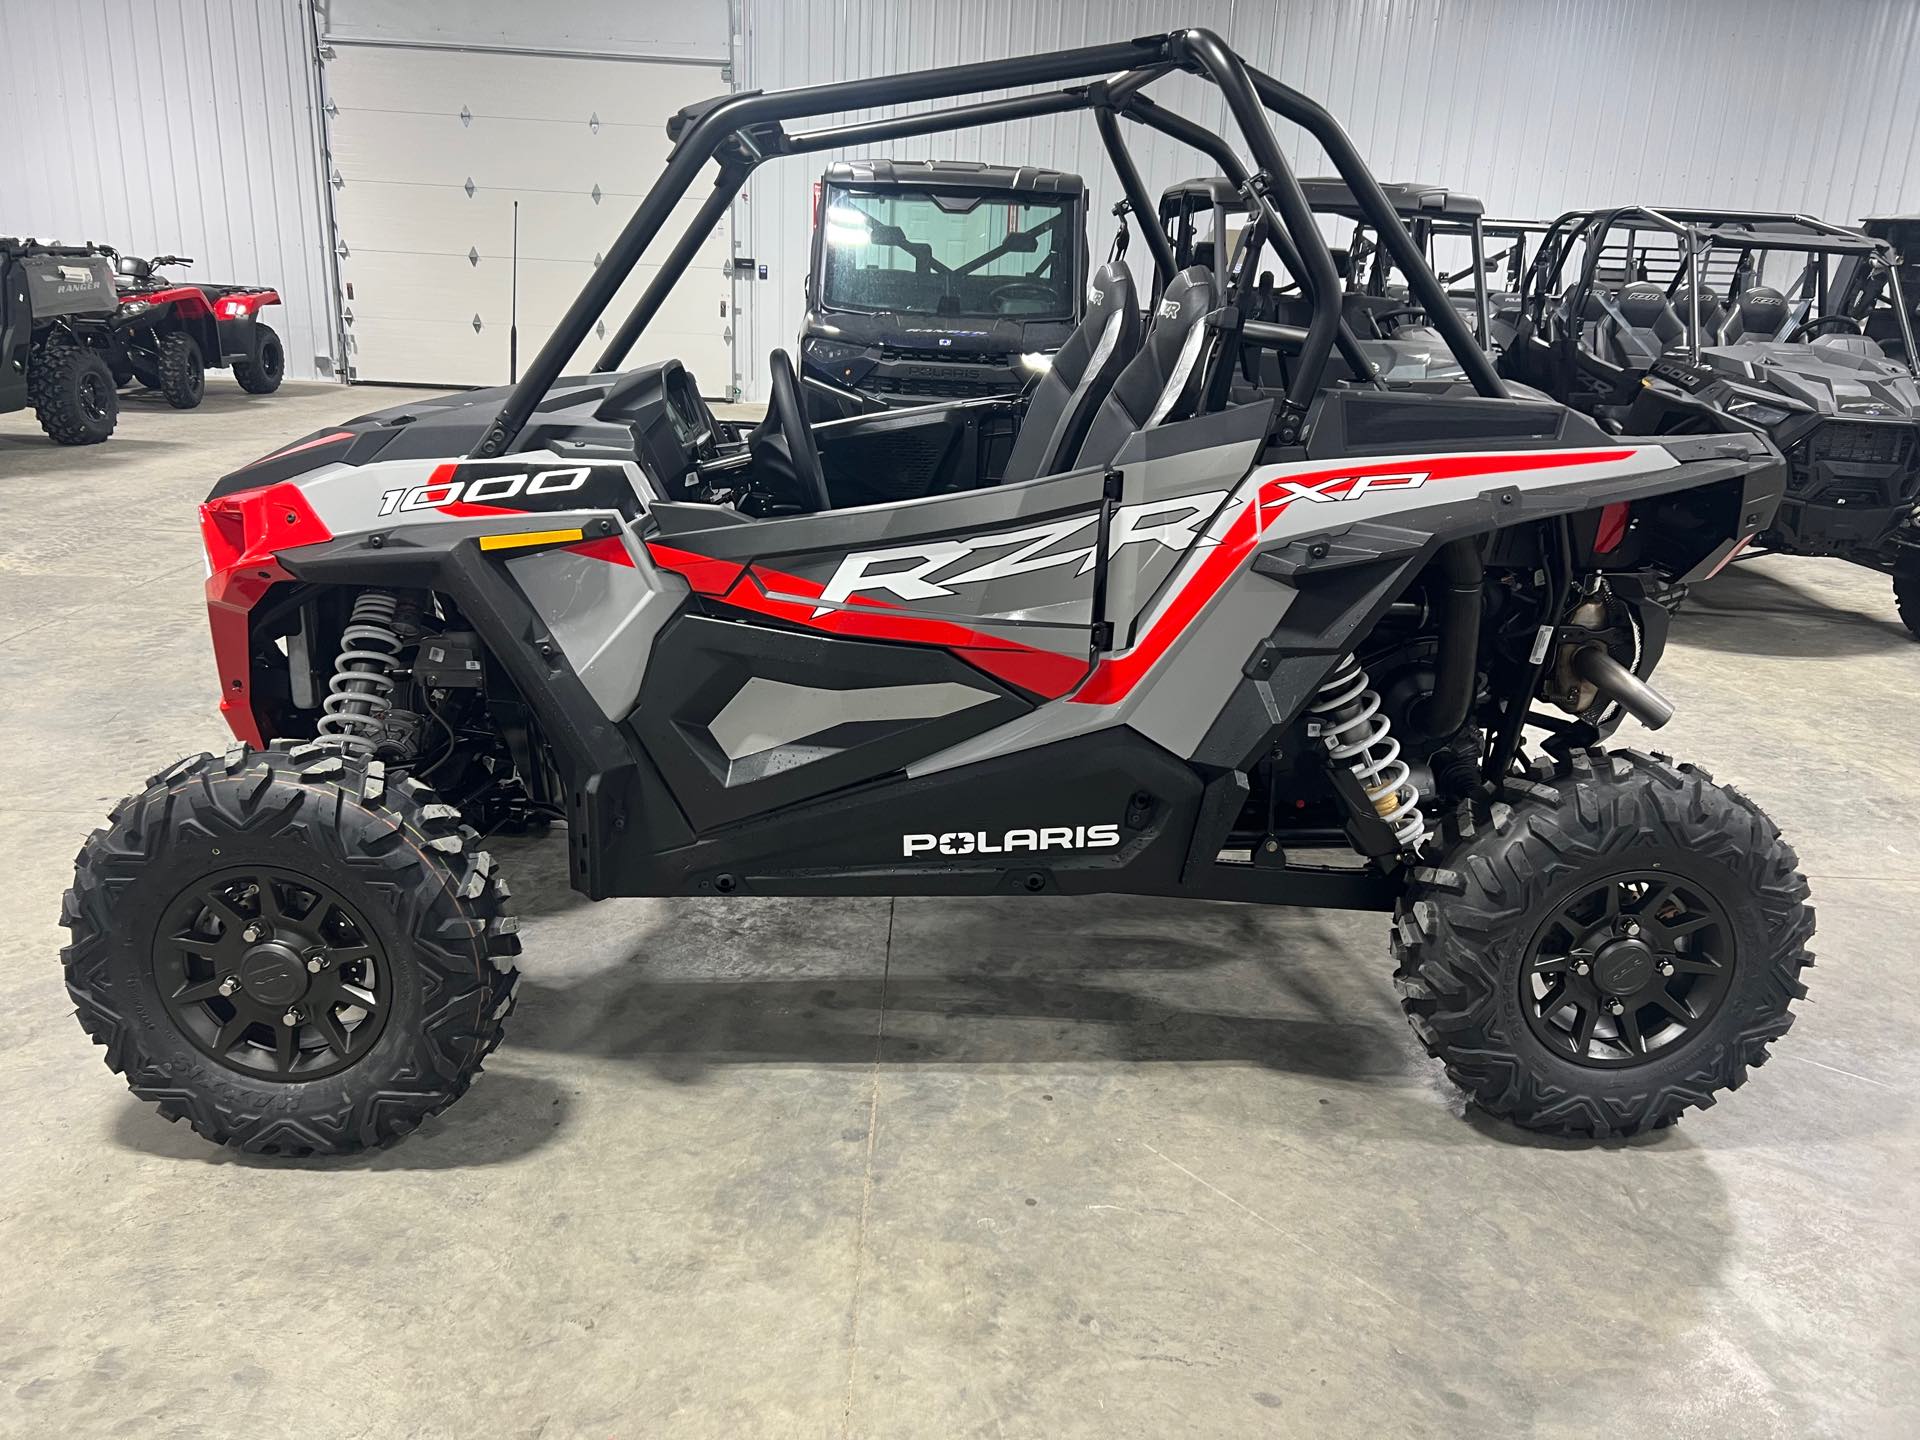 iron-hill-powersports-waukon-ia-featuring-new-pre-owned-polaris